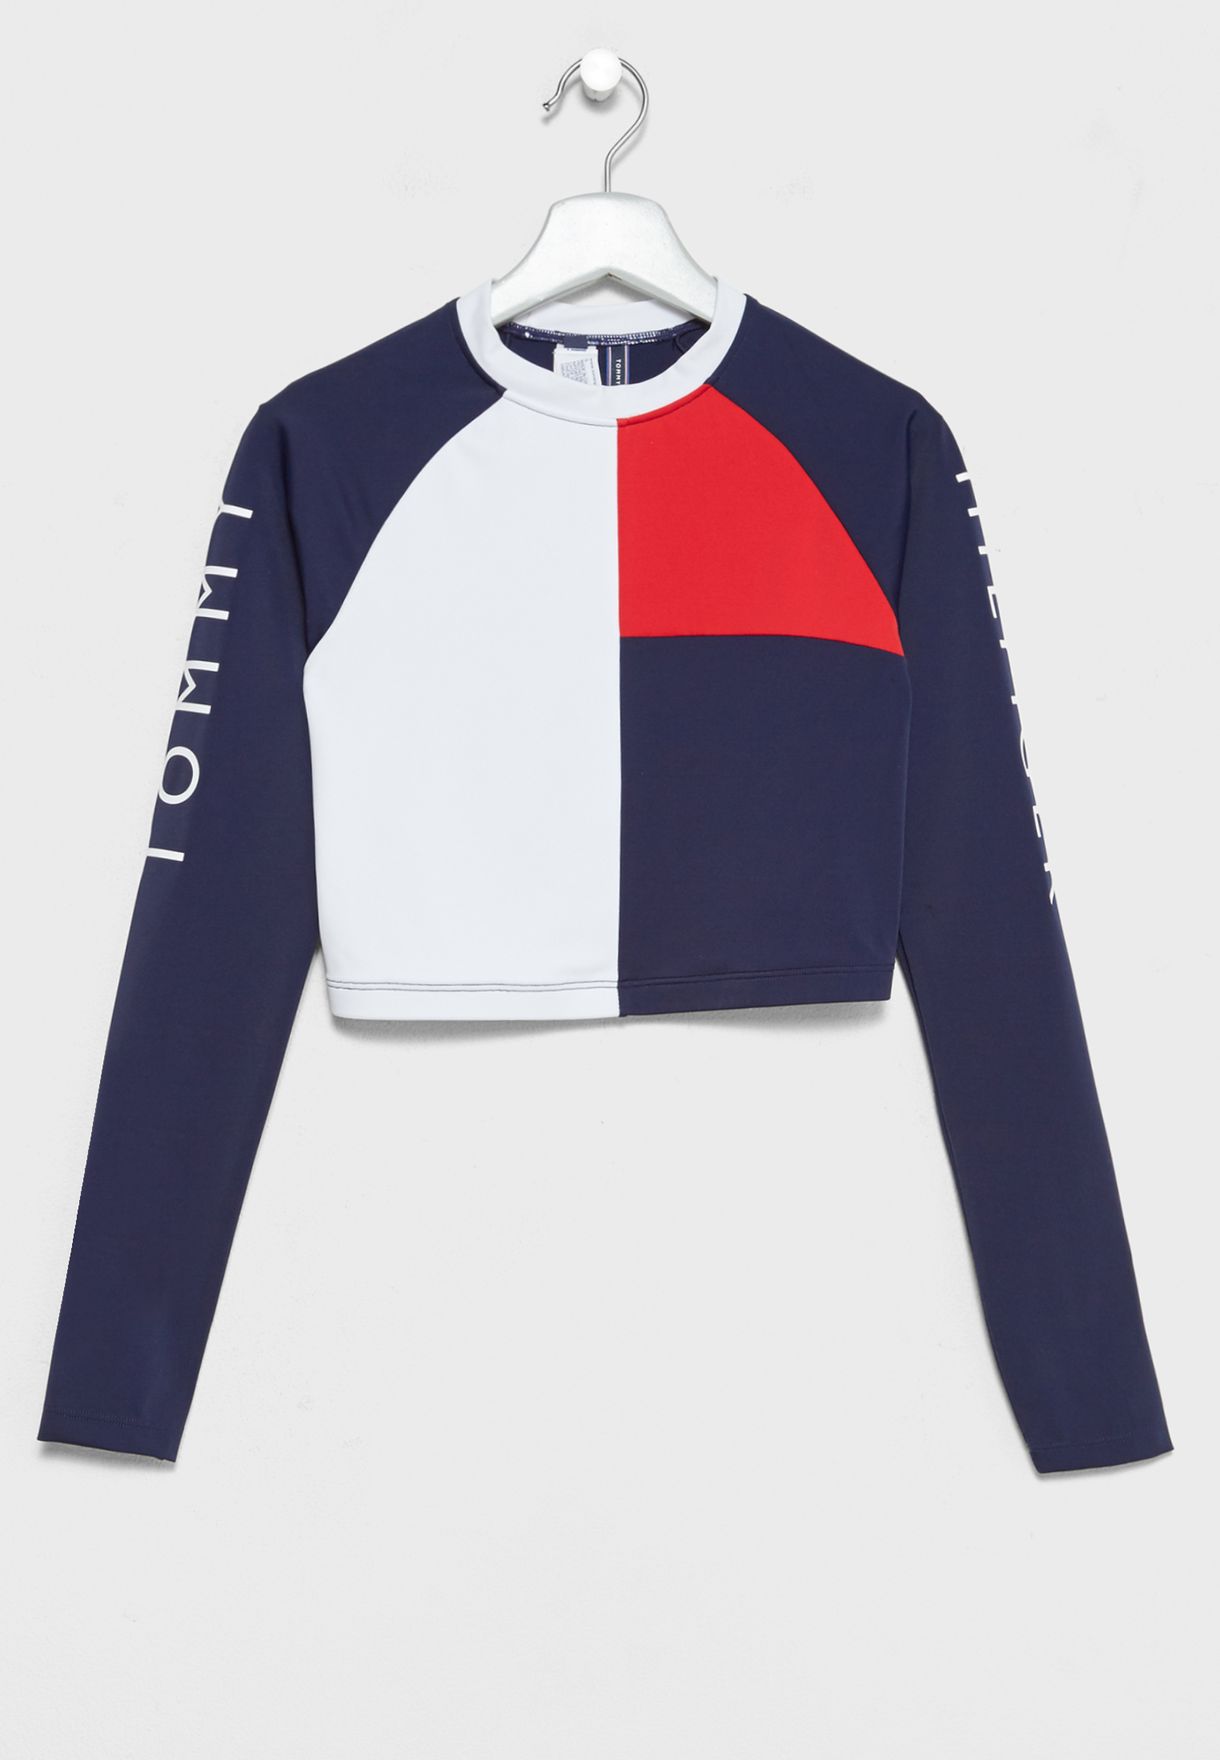 tommy hilfiger long sleeve swimsuit